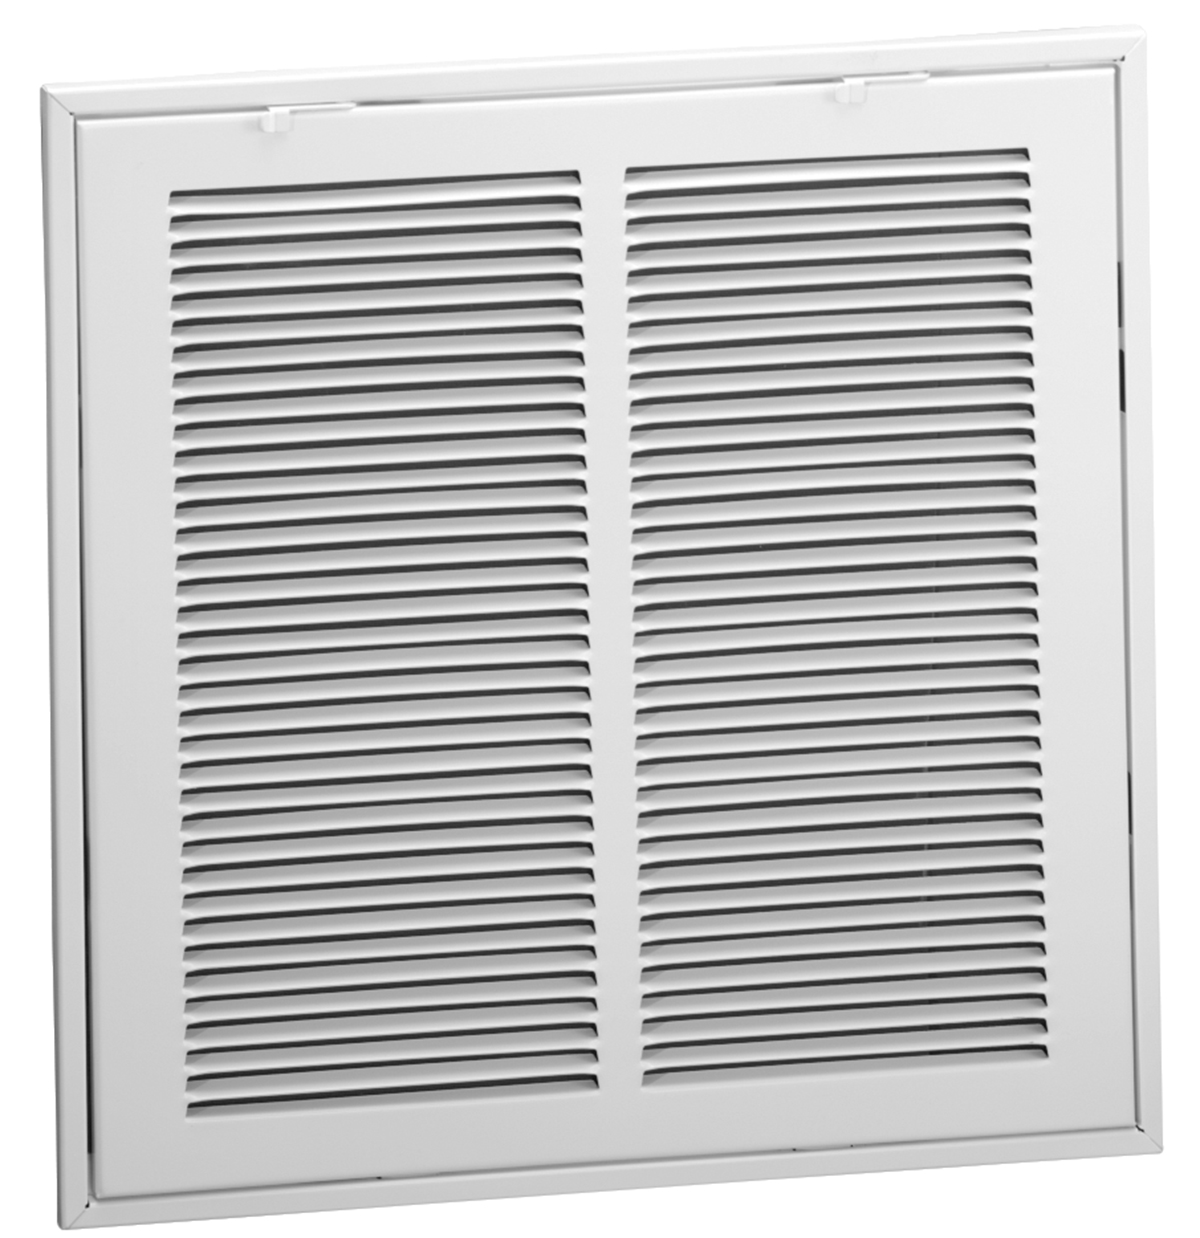 T-BAR RETURN AIR FILTER GRILLE WITH INSULATED BACK